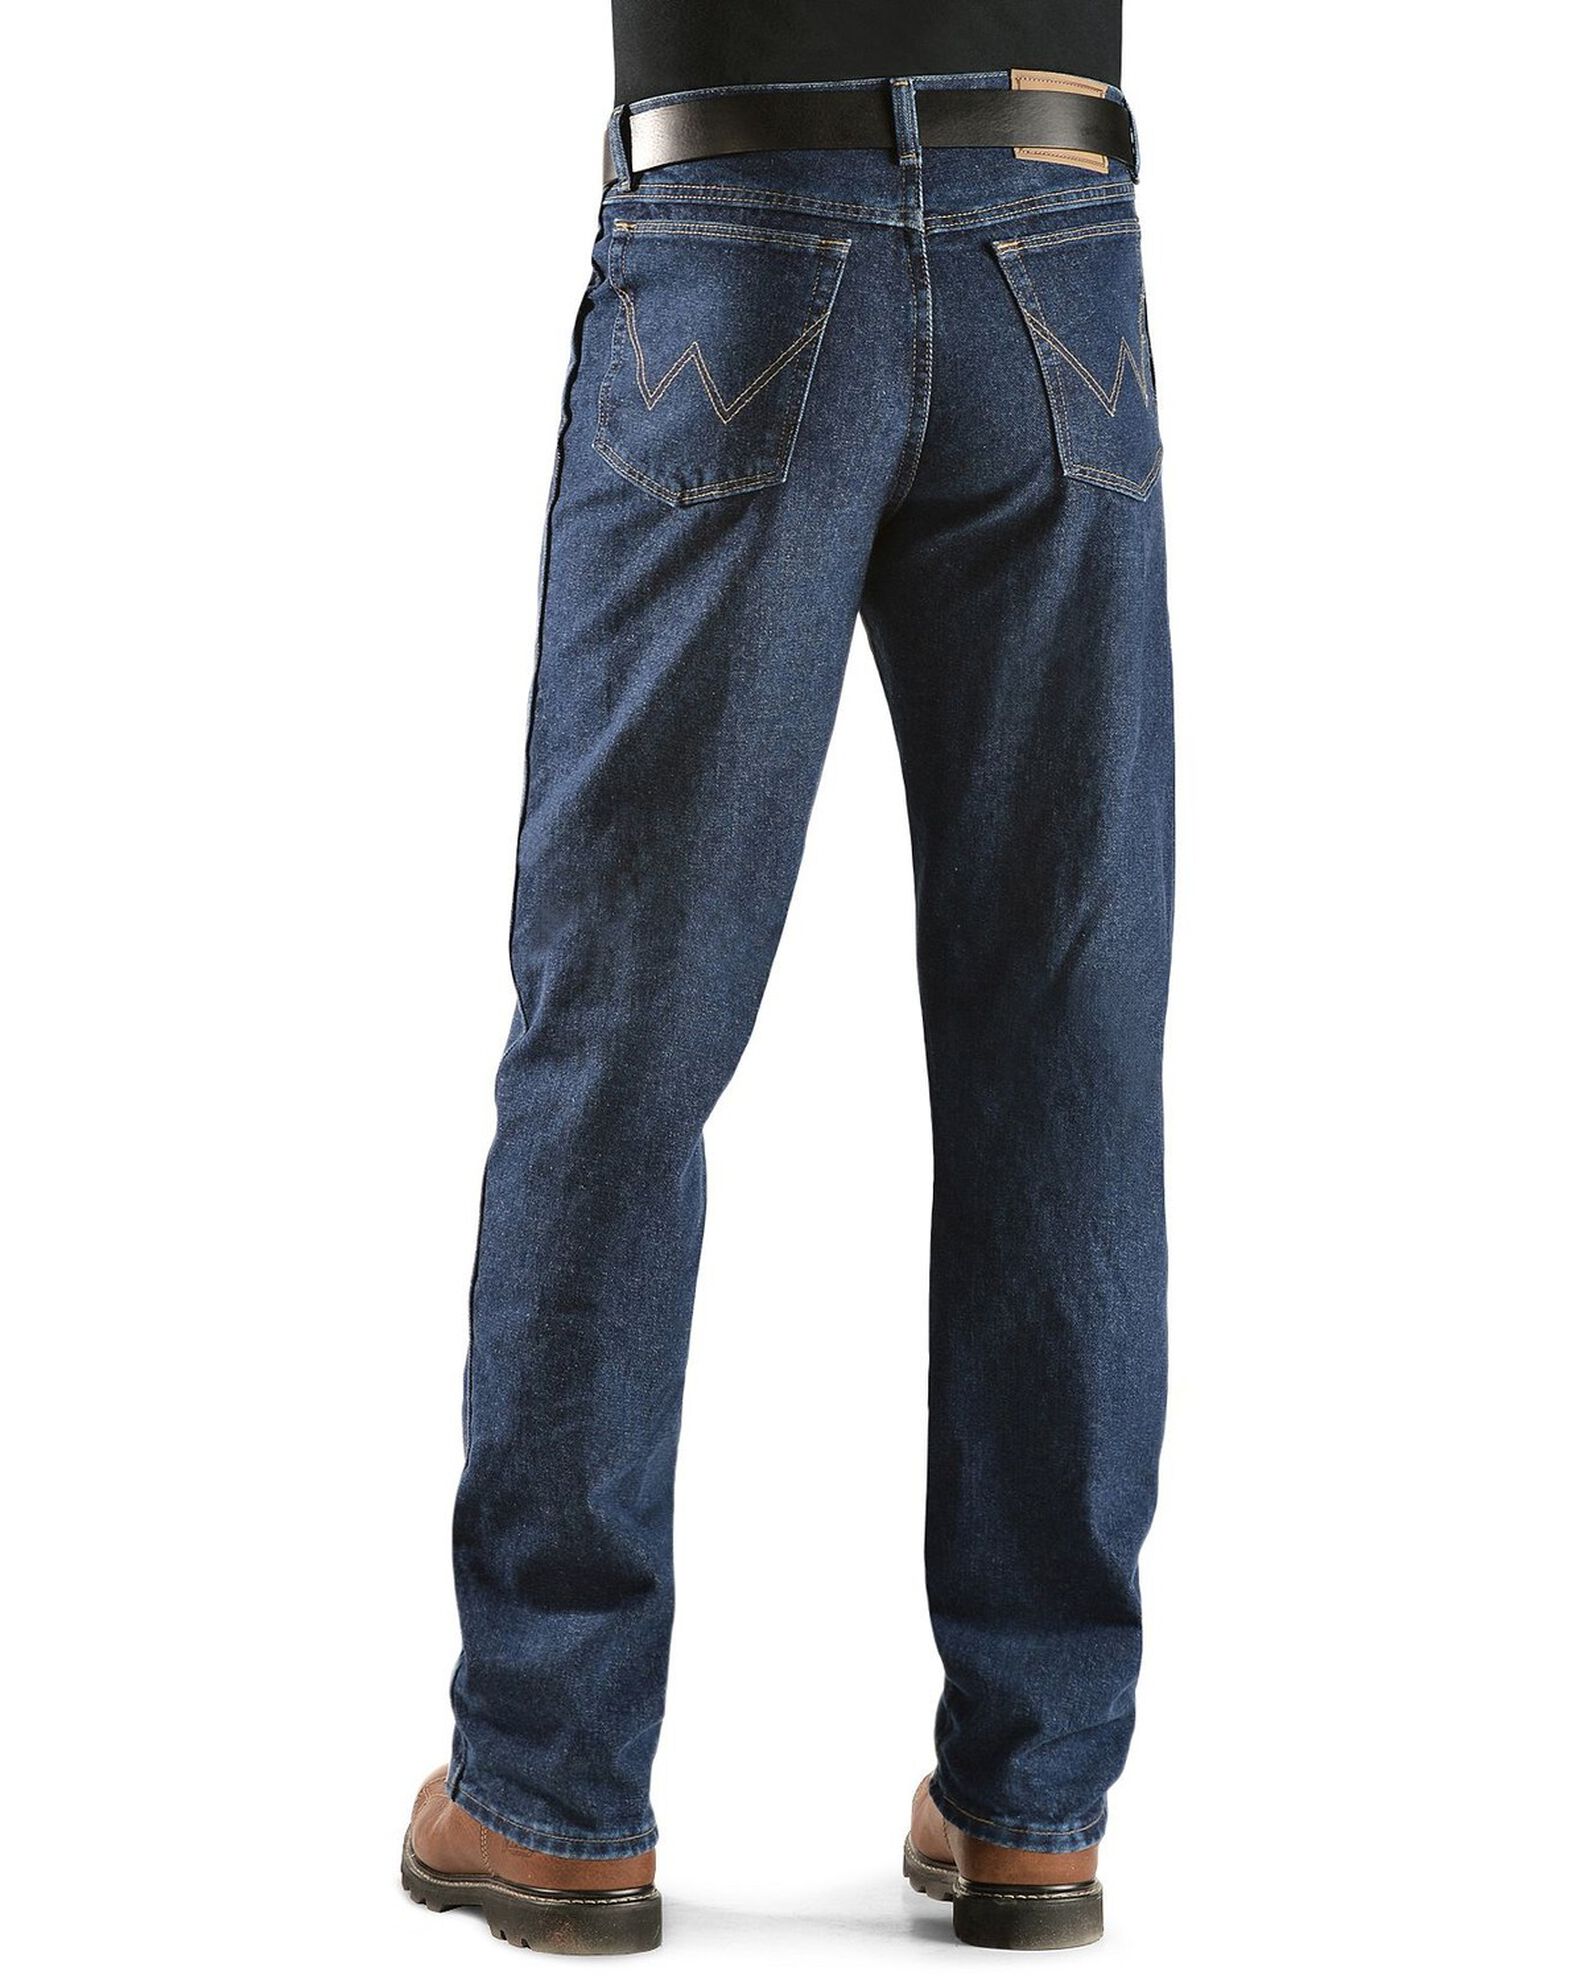 Wrangler Men's Rugged Wear Relaxed Fit Jeans - Country Outfitter